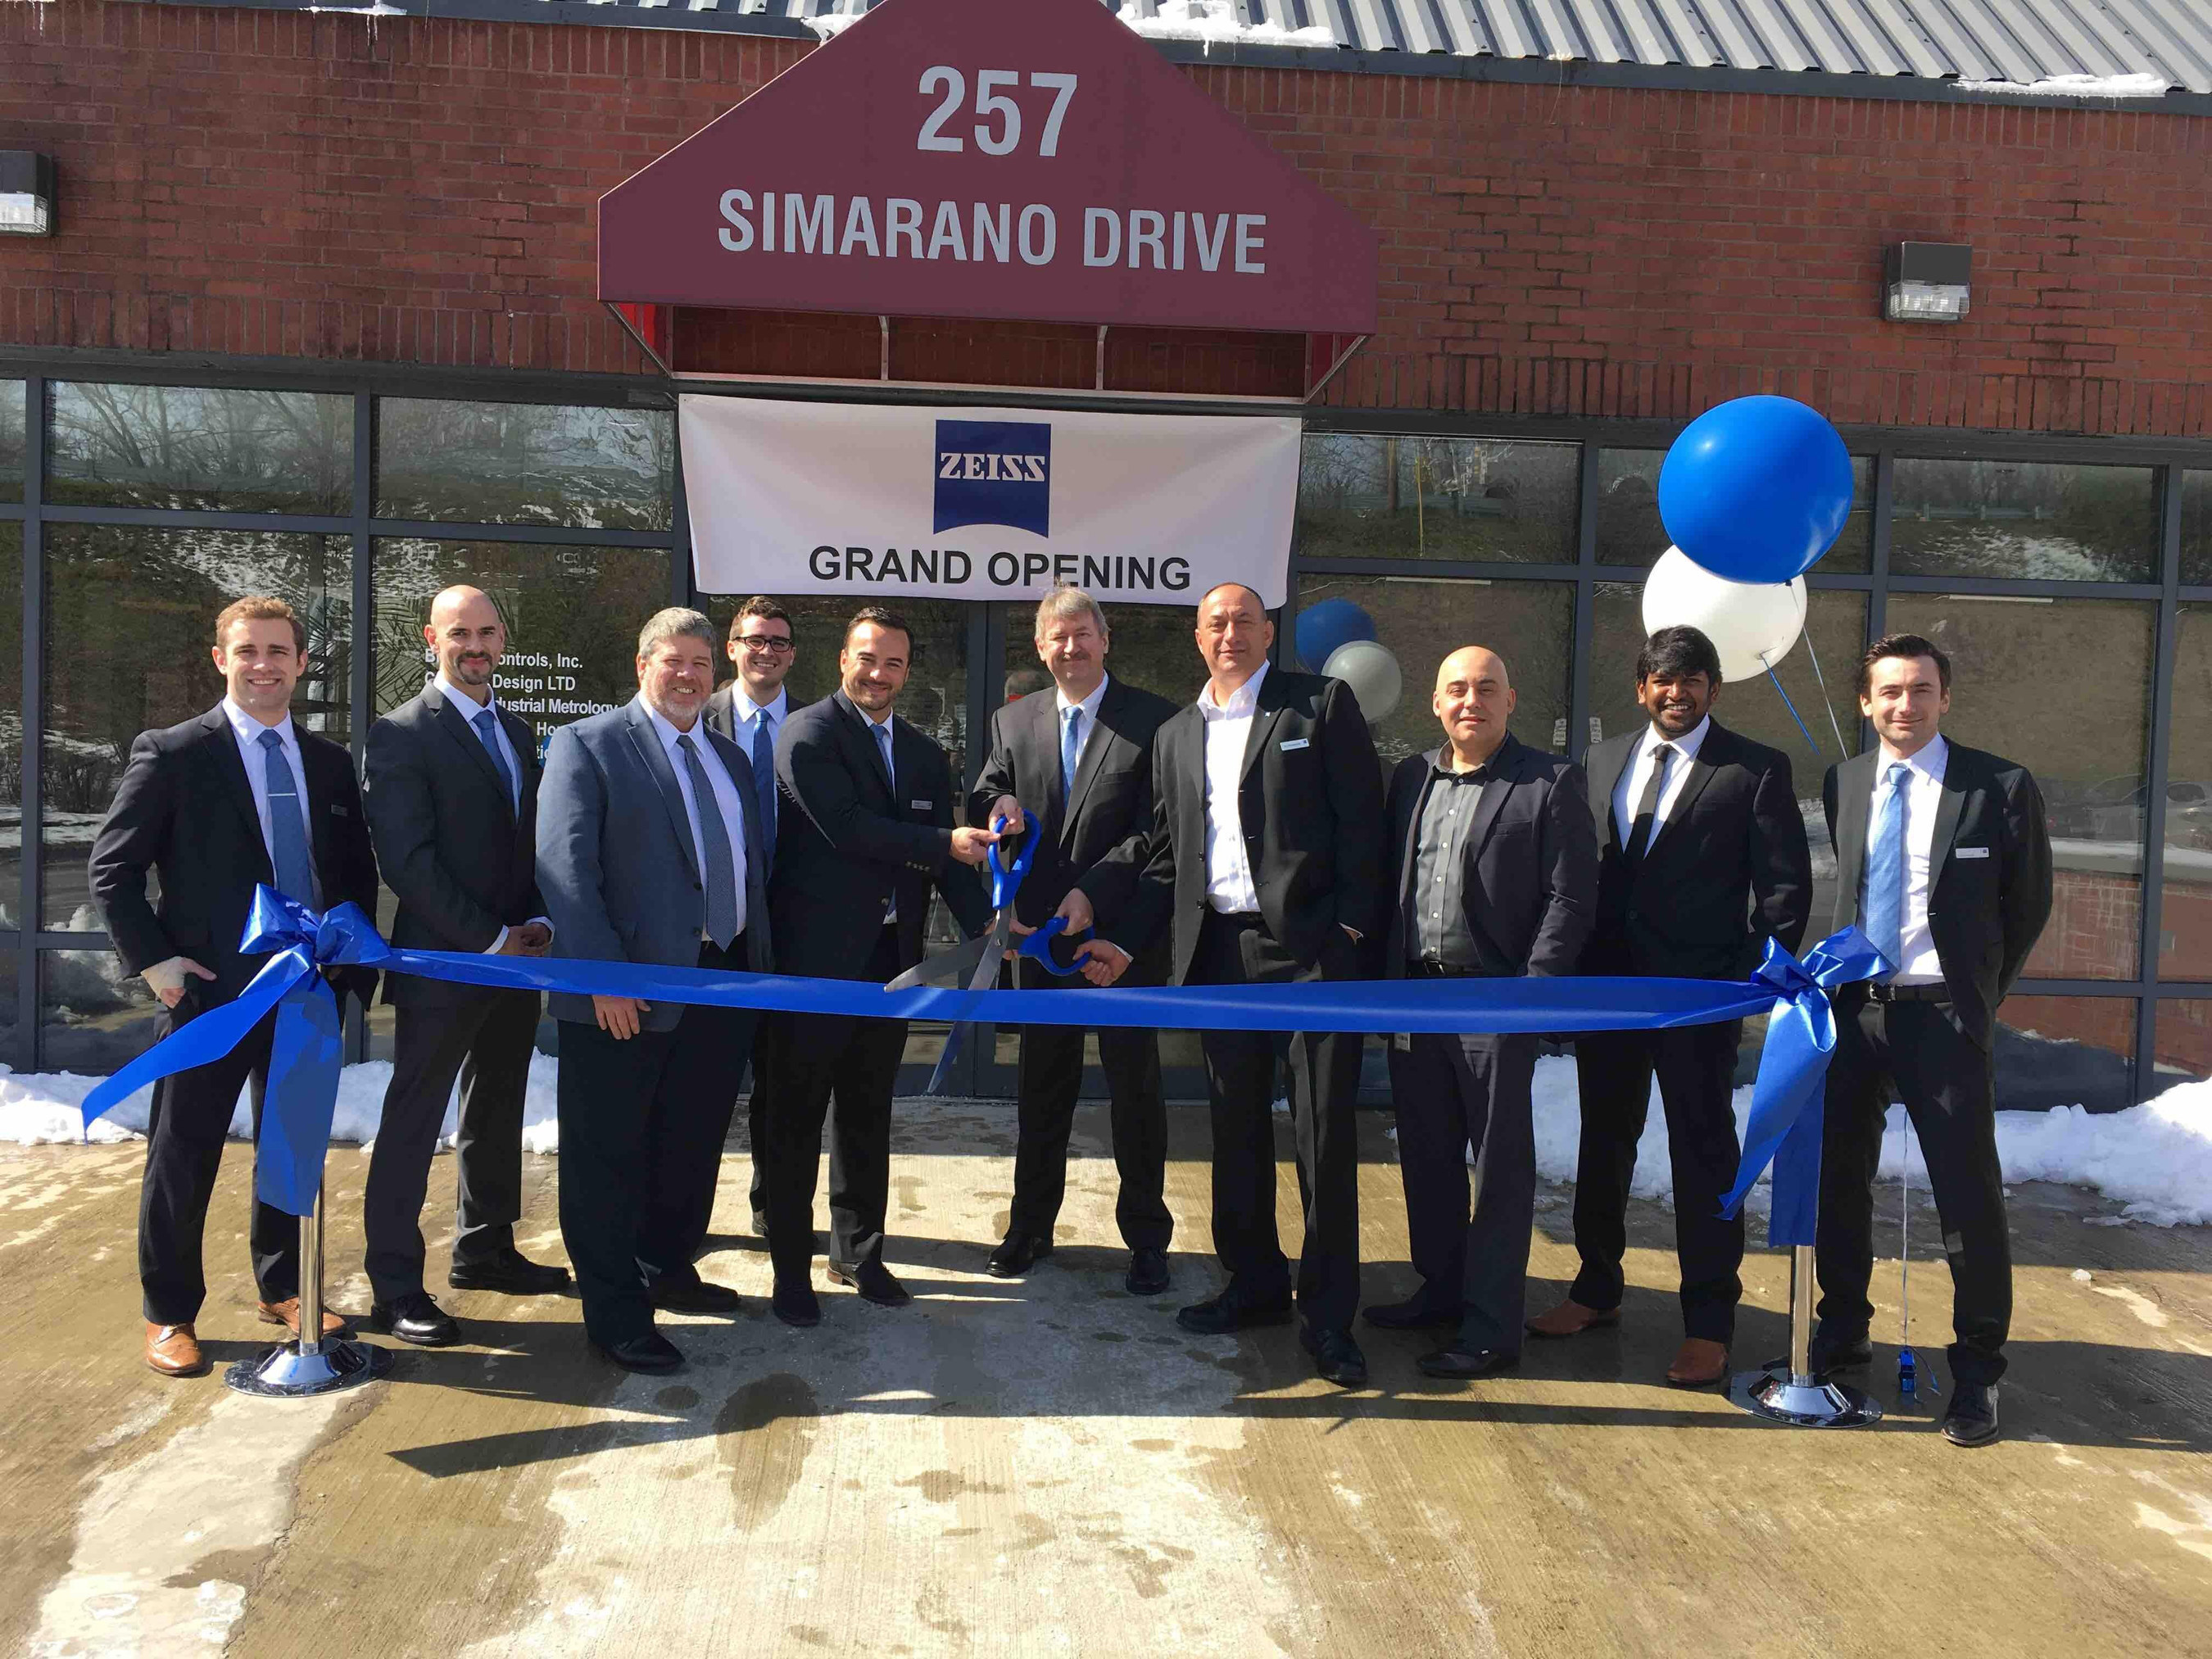 ZEISS management and local team celebrate grand opening of new metrology service center in Marlborough, Massachusetts with official ribbon cutting in April.